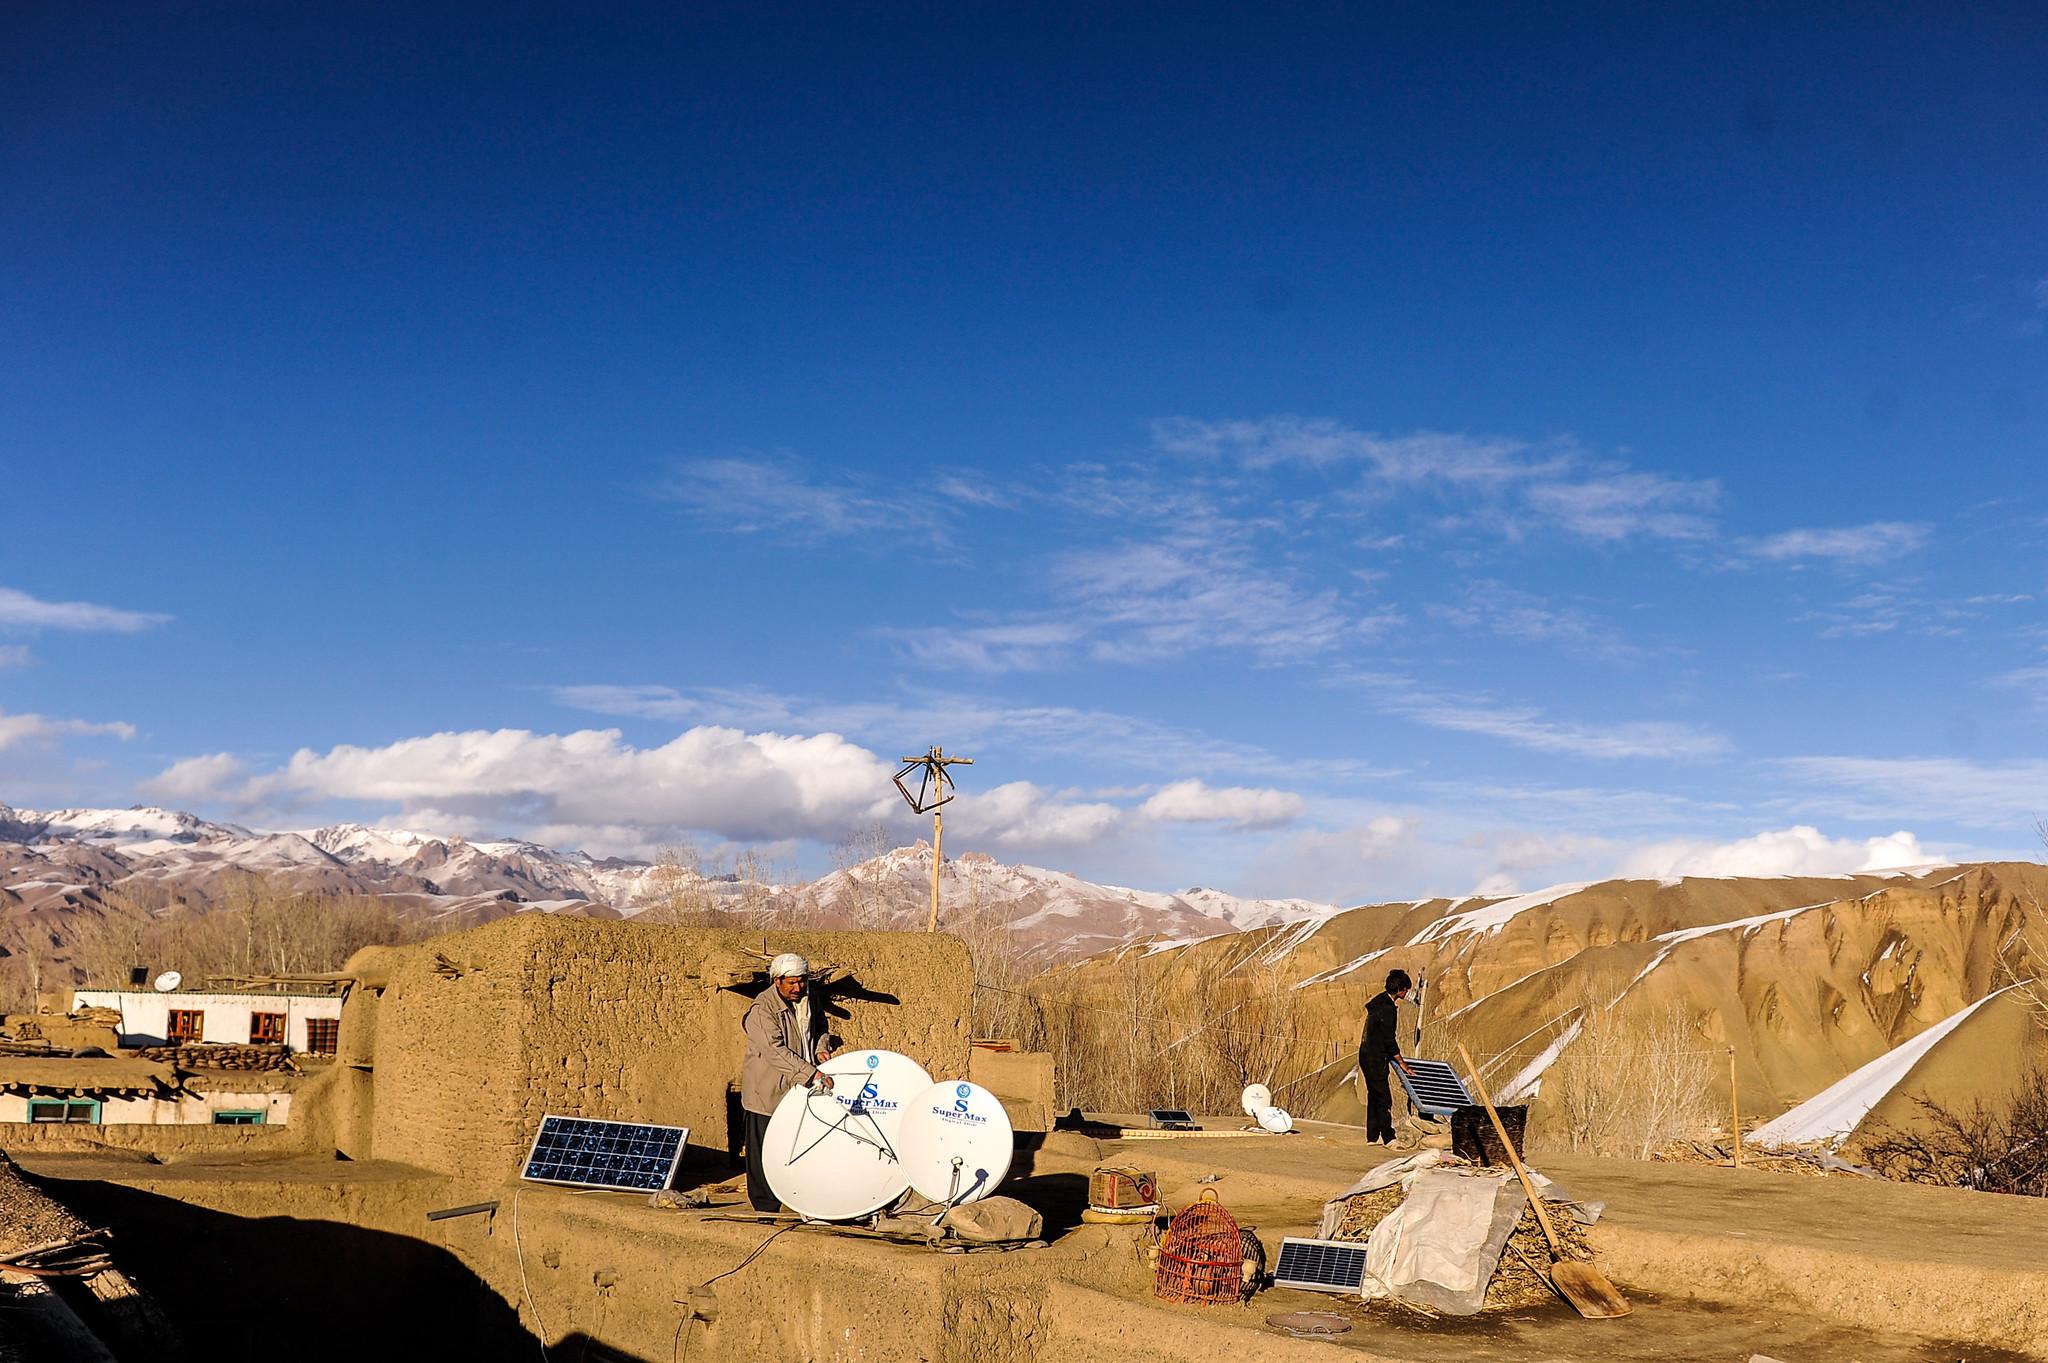 Solar power panels bring light and connectivity into homes in Afghanistan.